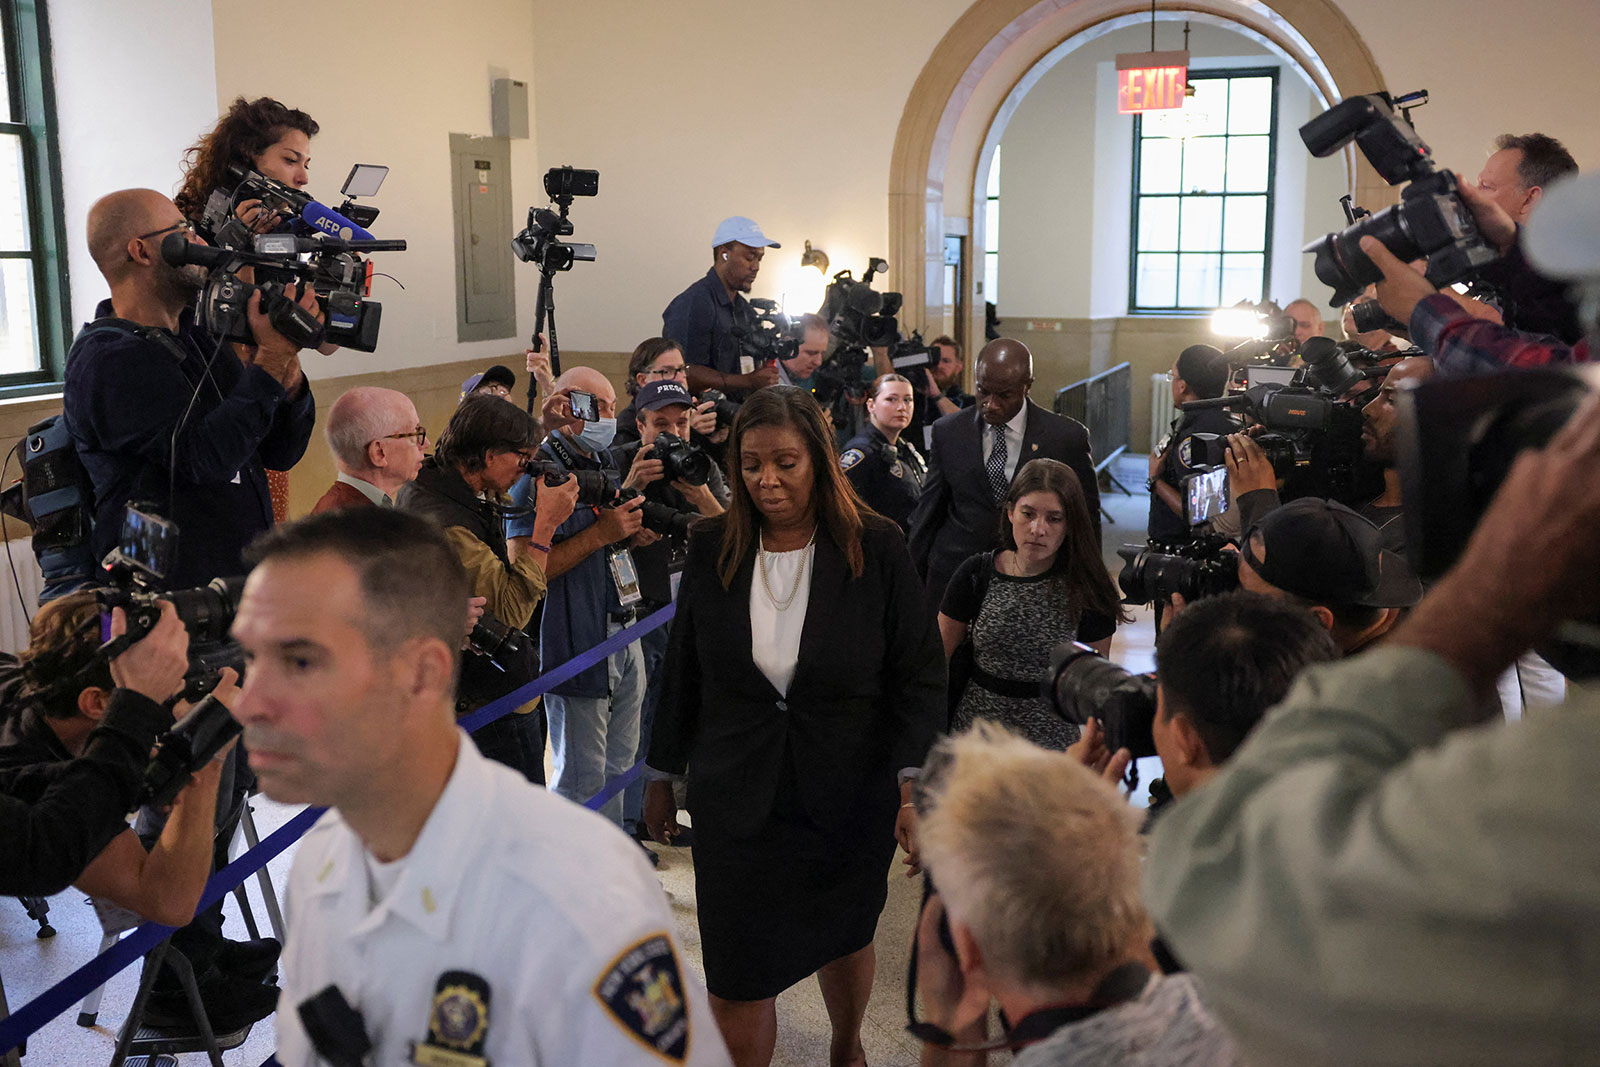 New York Attorney General Letitia James arrives for the trial of former President Donald Trump in New York on Monday.